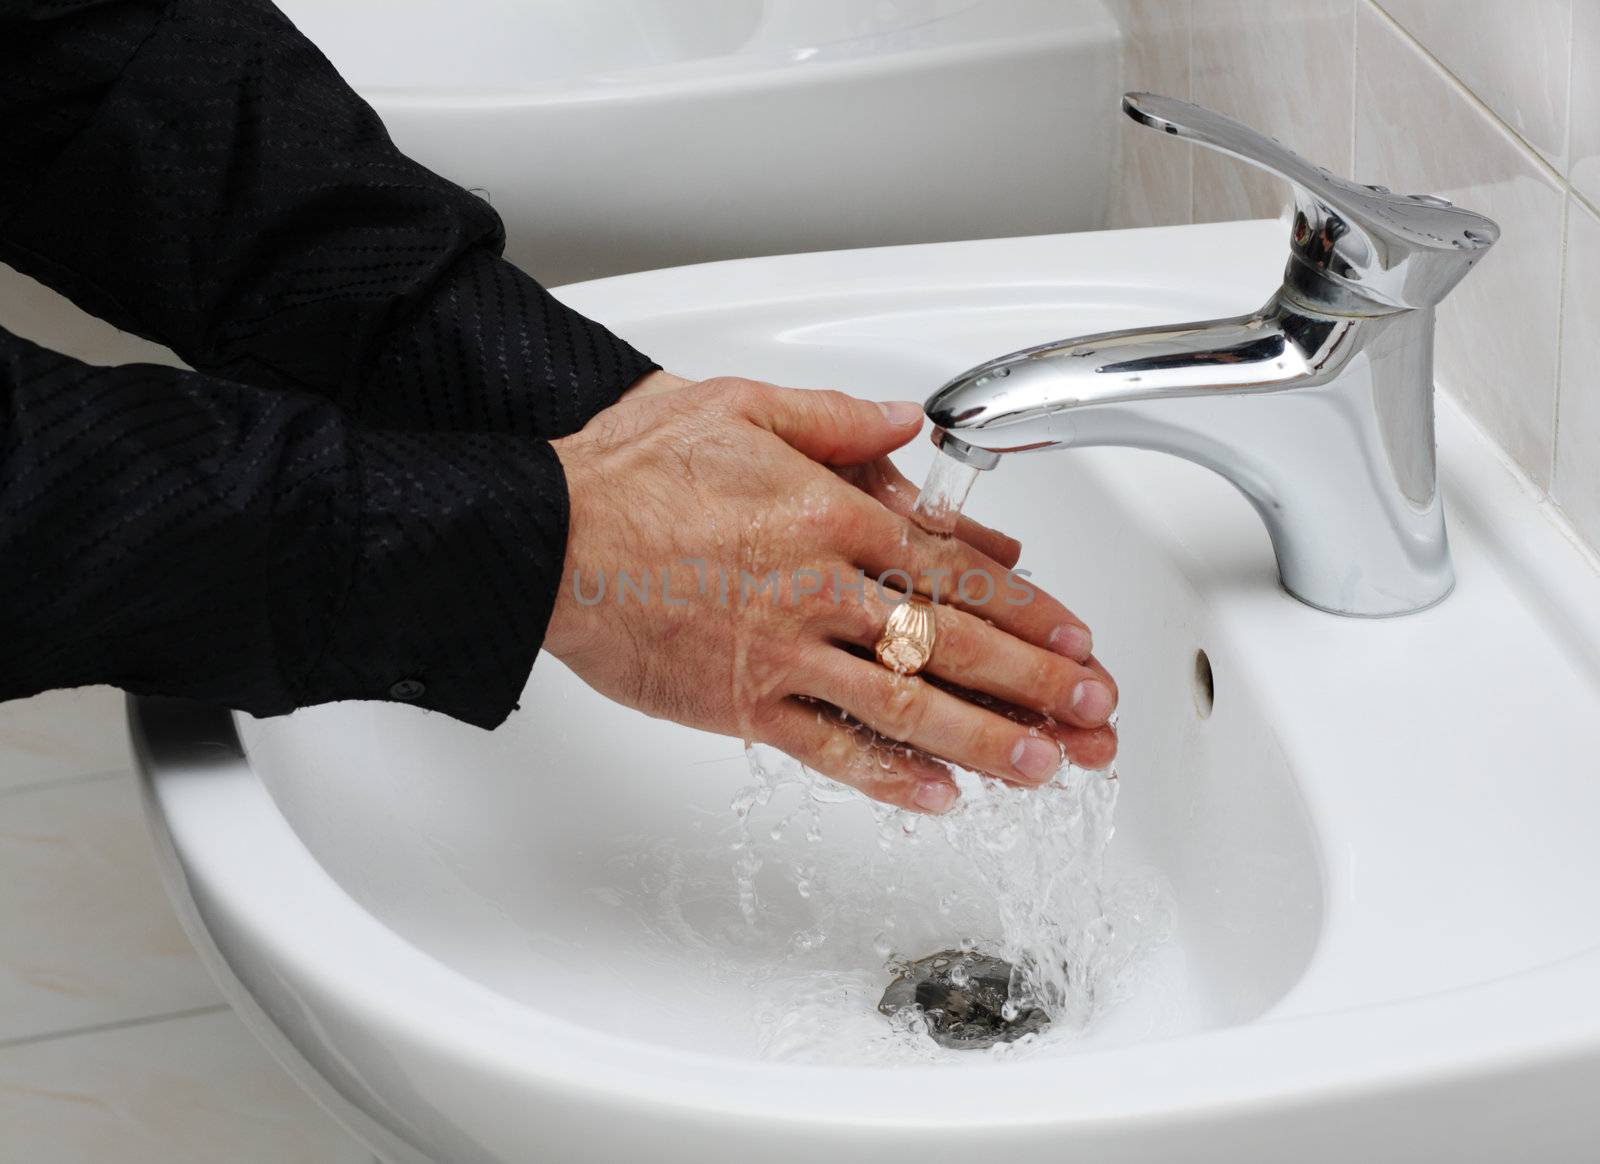 Man washing his hands under running water faucet